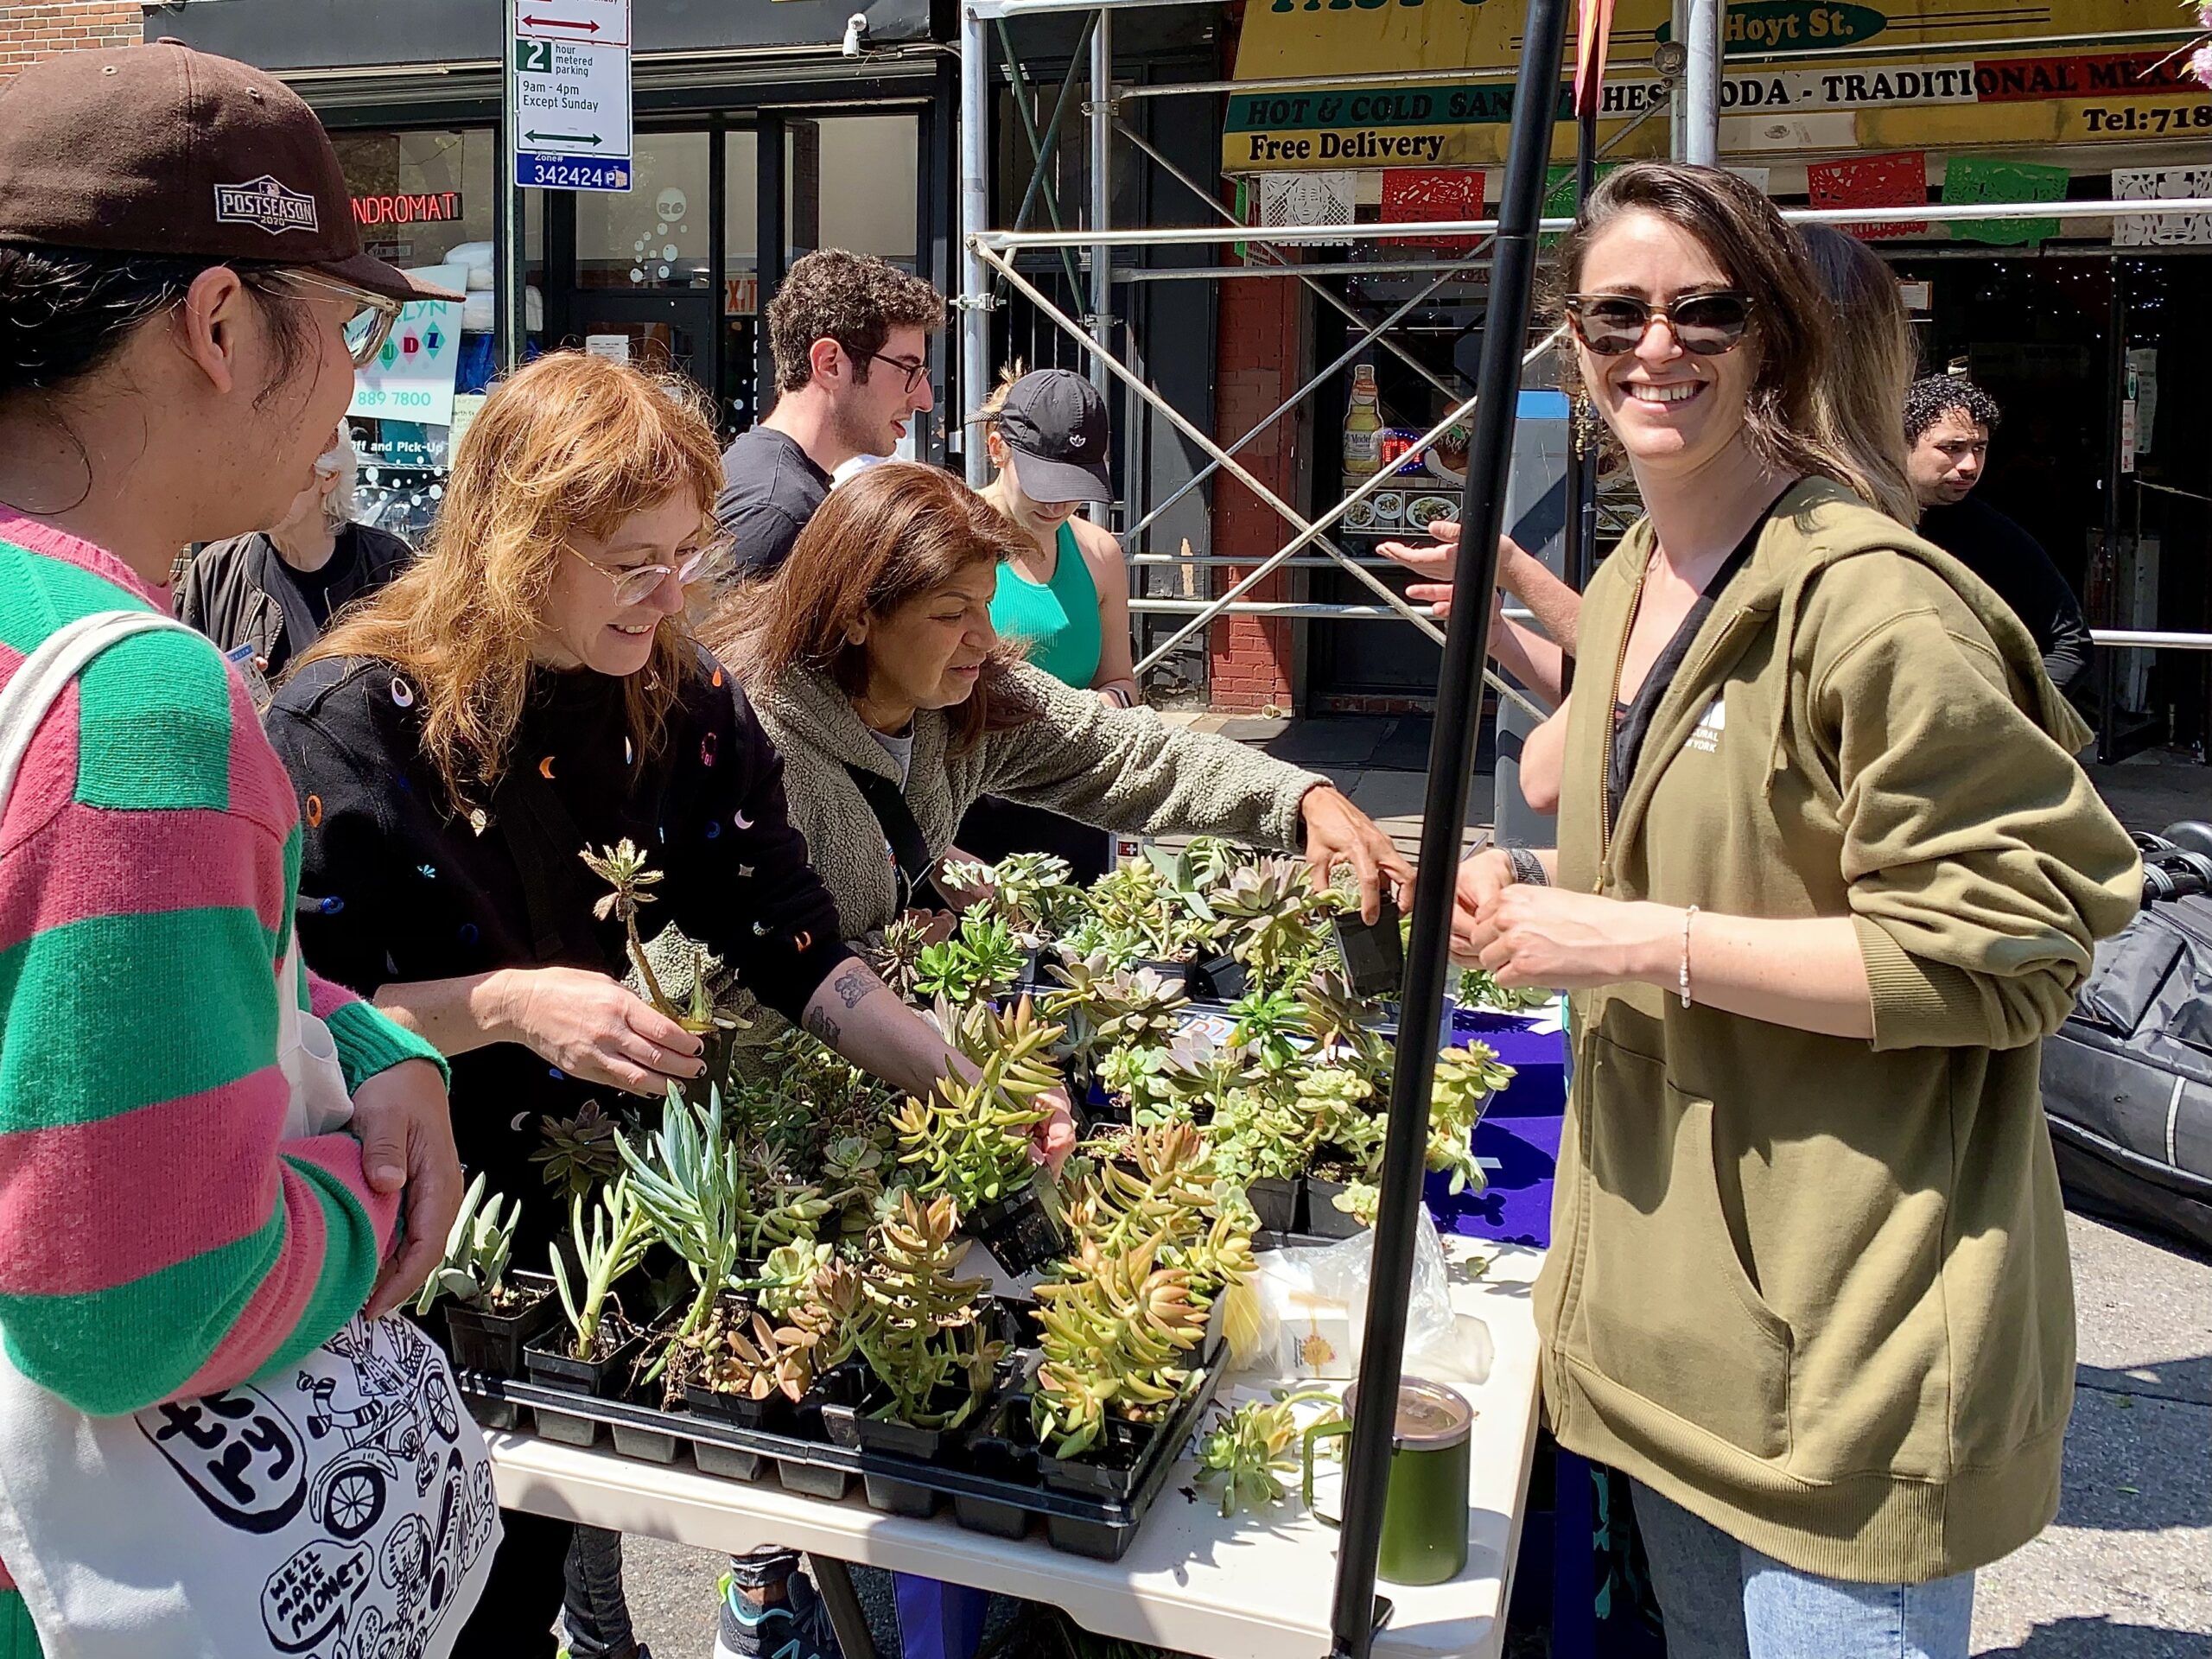 On Hoyt Street between State Street and Atlantic Avenue, The Hort gave away free plants in an Open Streets event sponsored by the Atlantic Avenue BID.